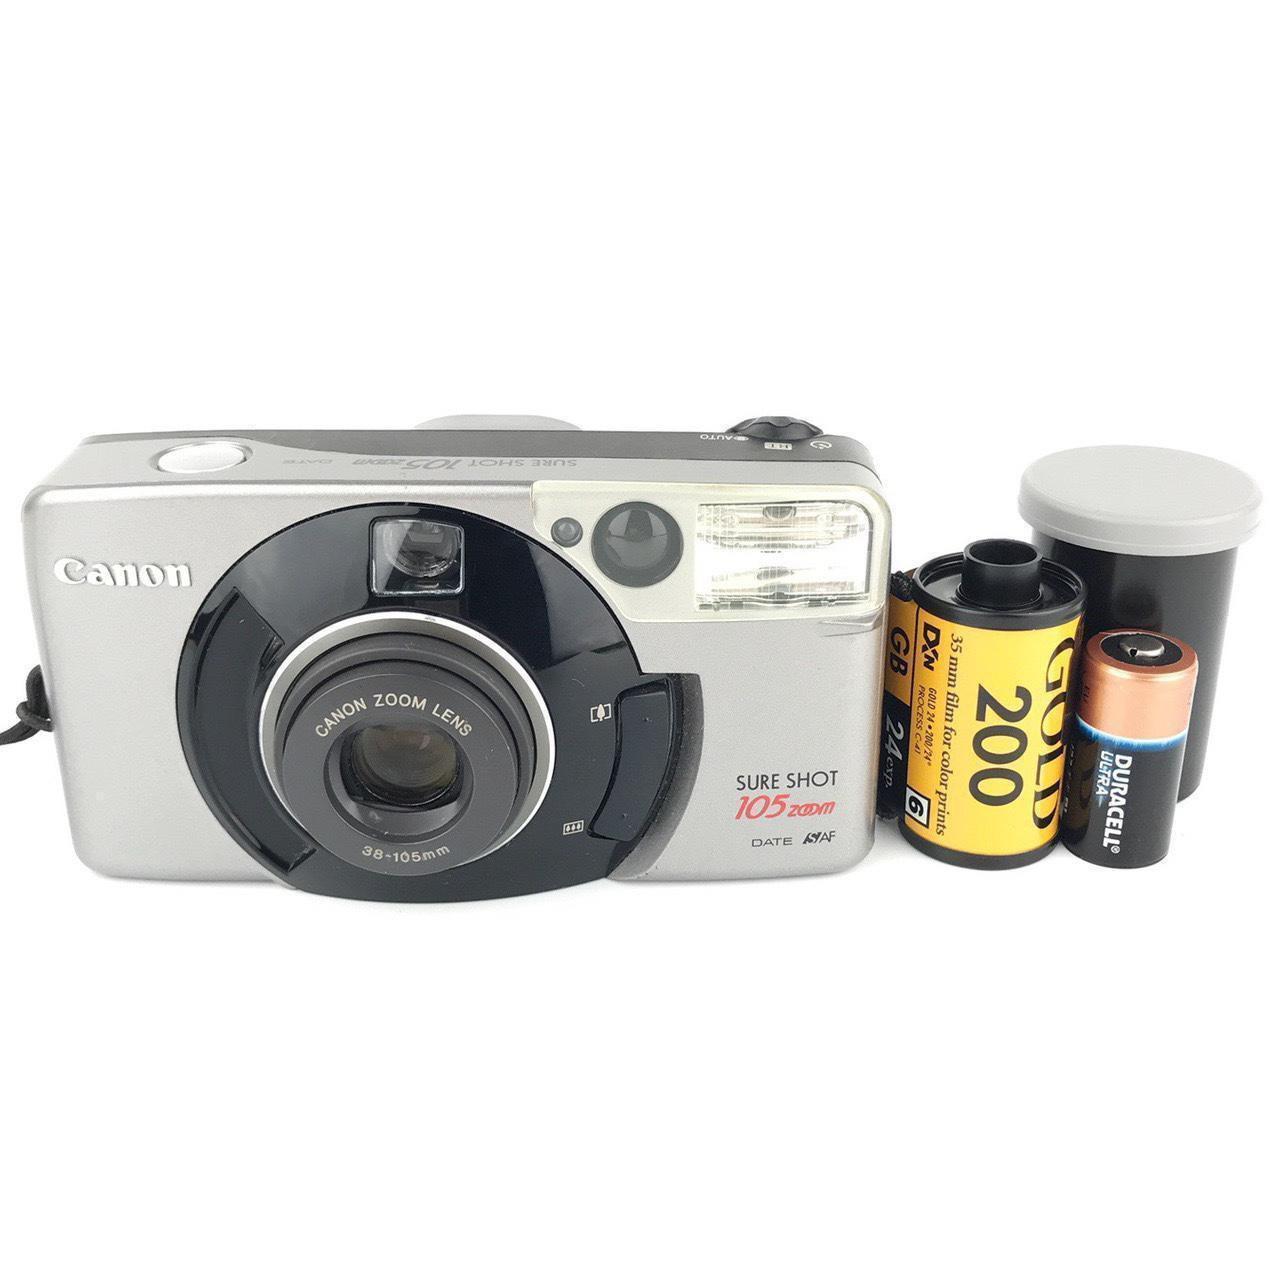 Product Image 1 - Canon Sure Shot 105 35mm